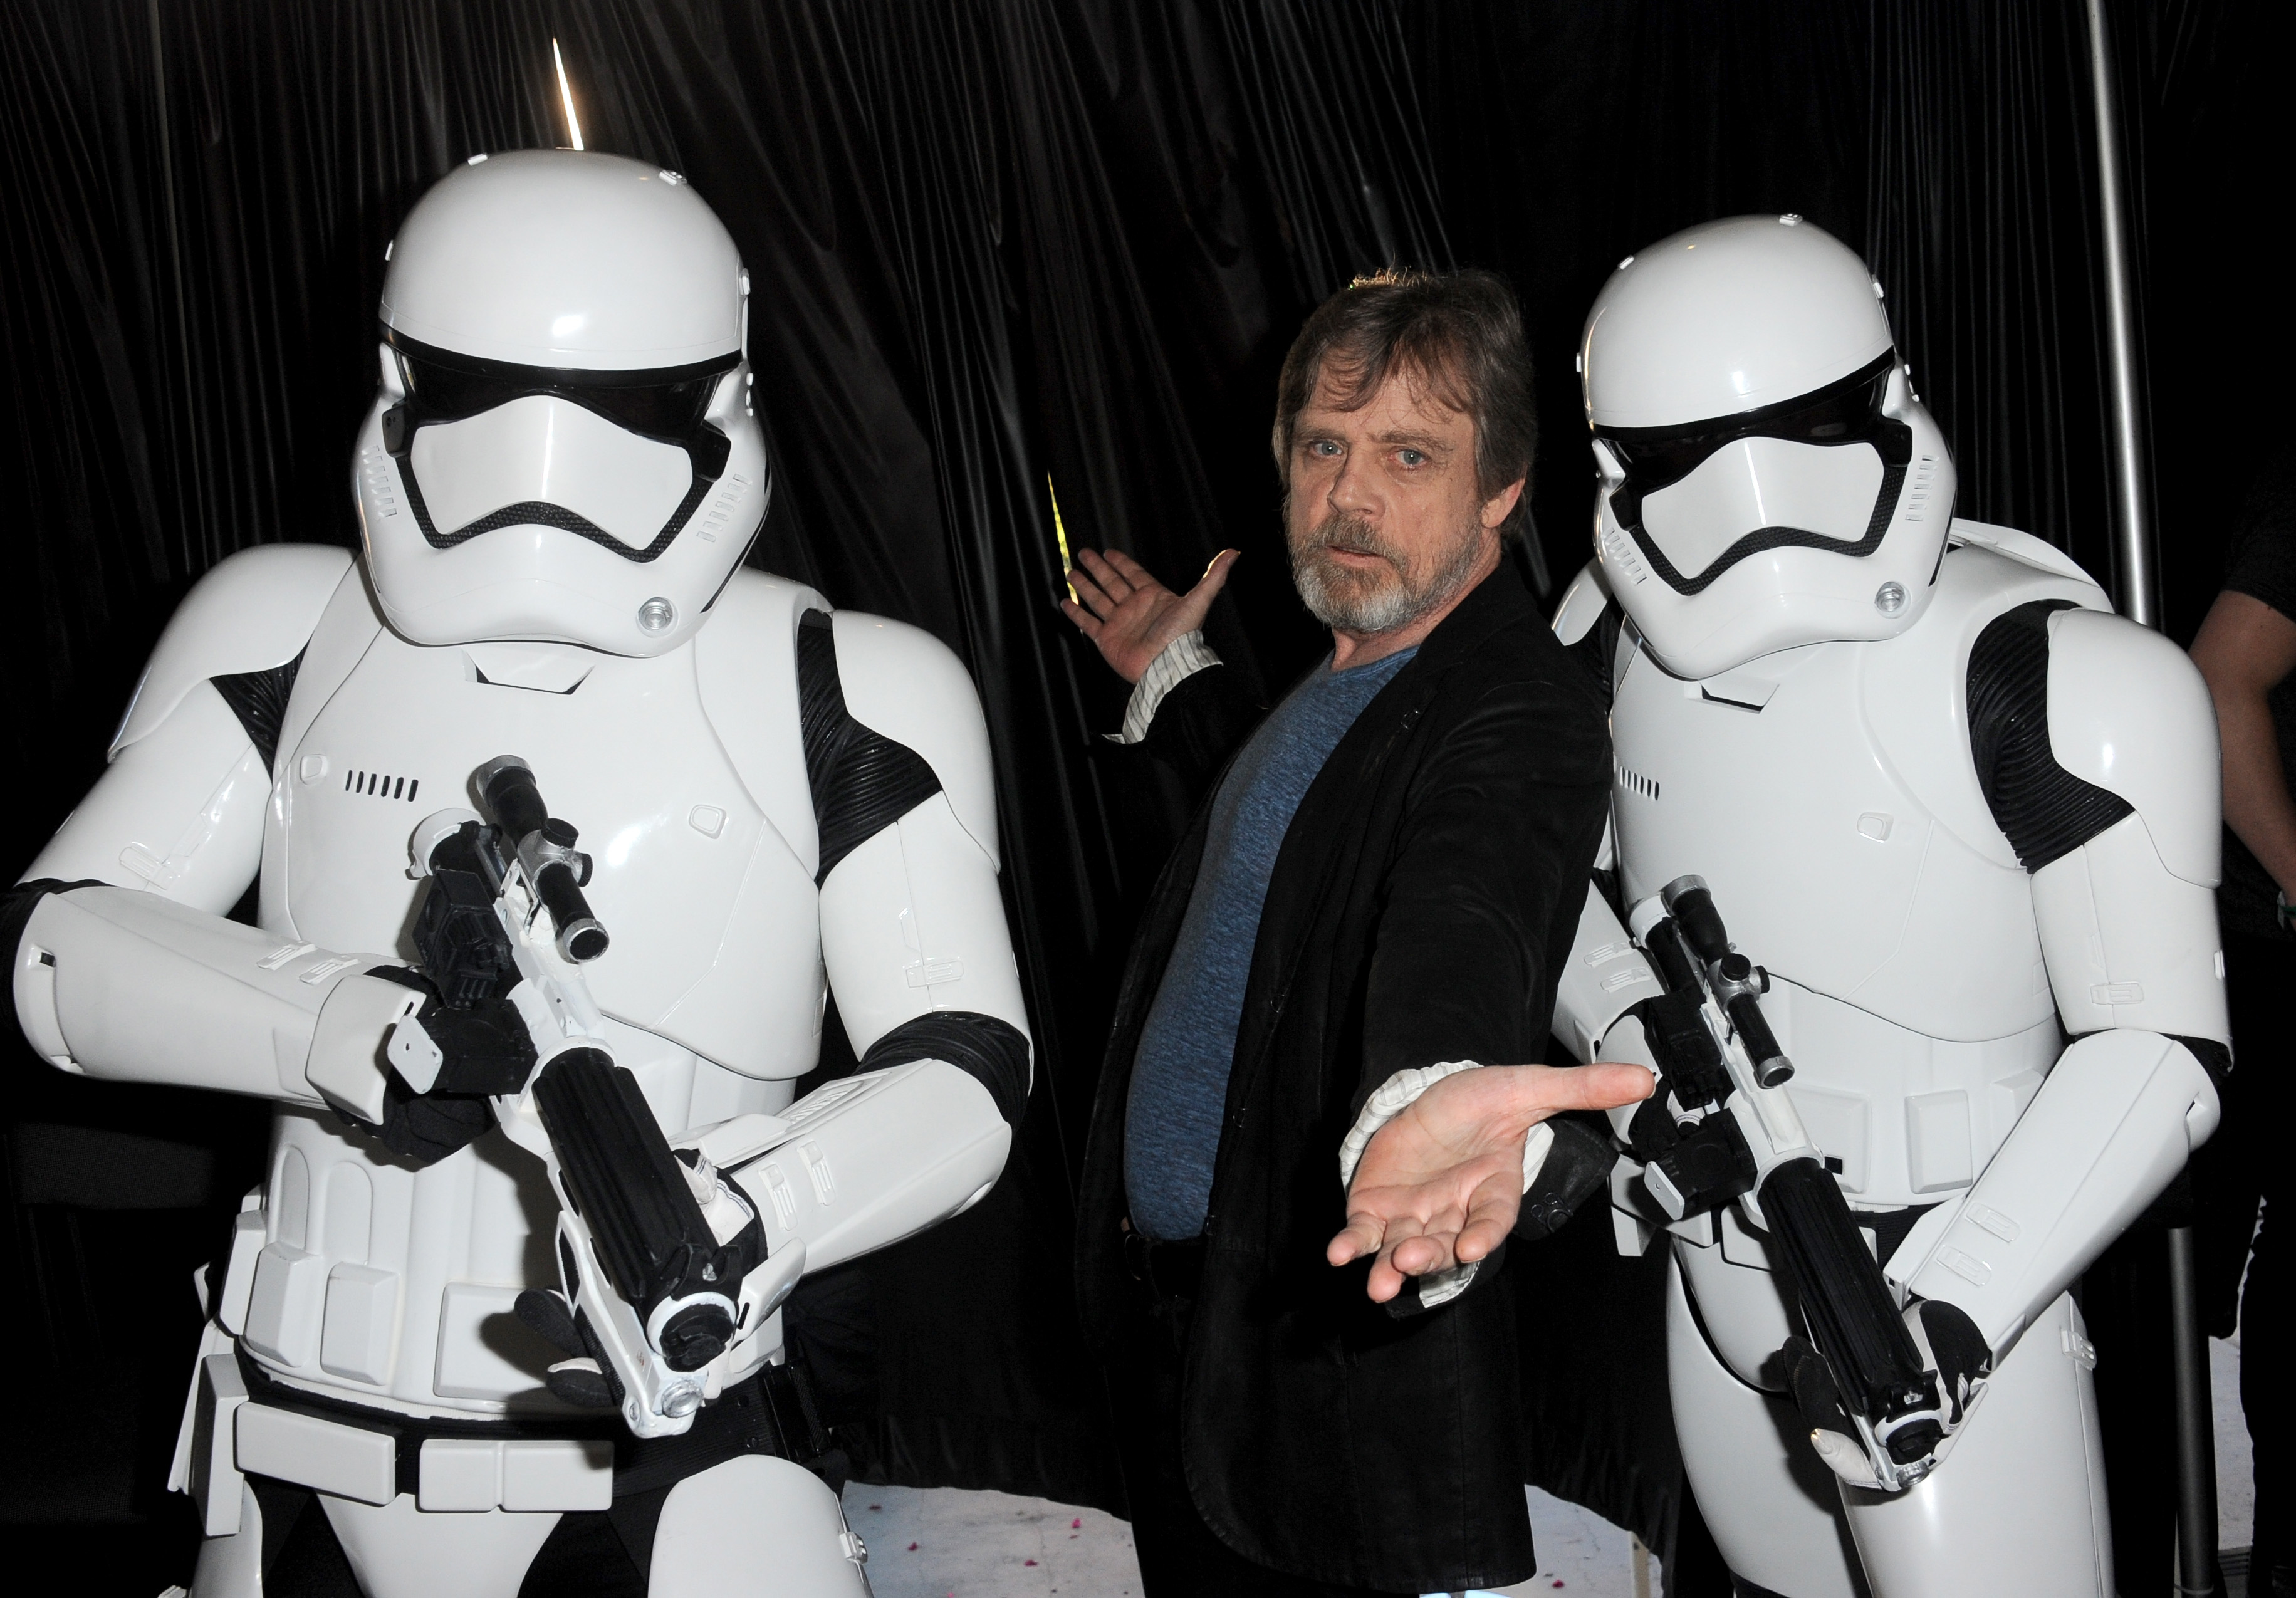 Mark Hamill saved by guide after slipping on dangerous Skellig